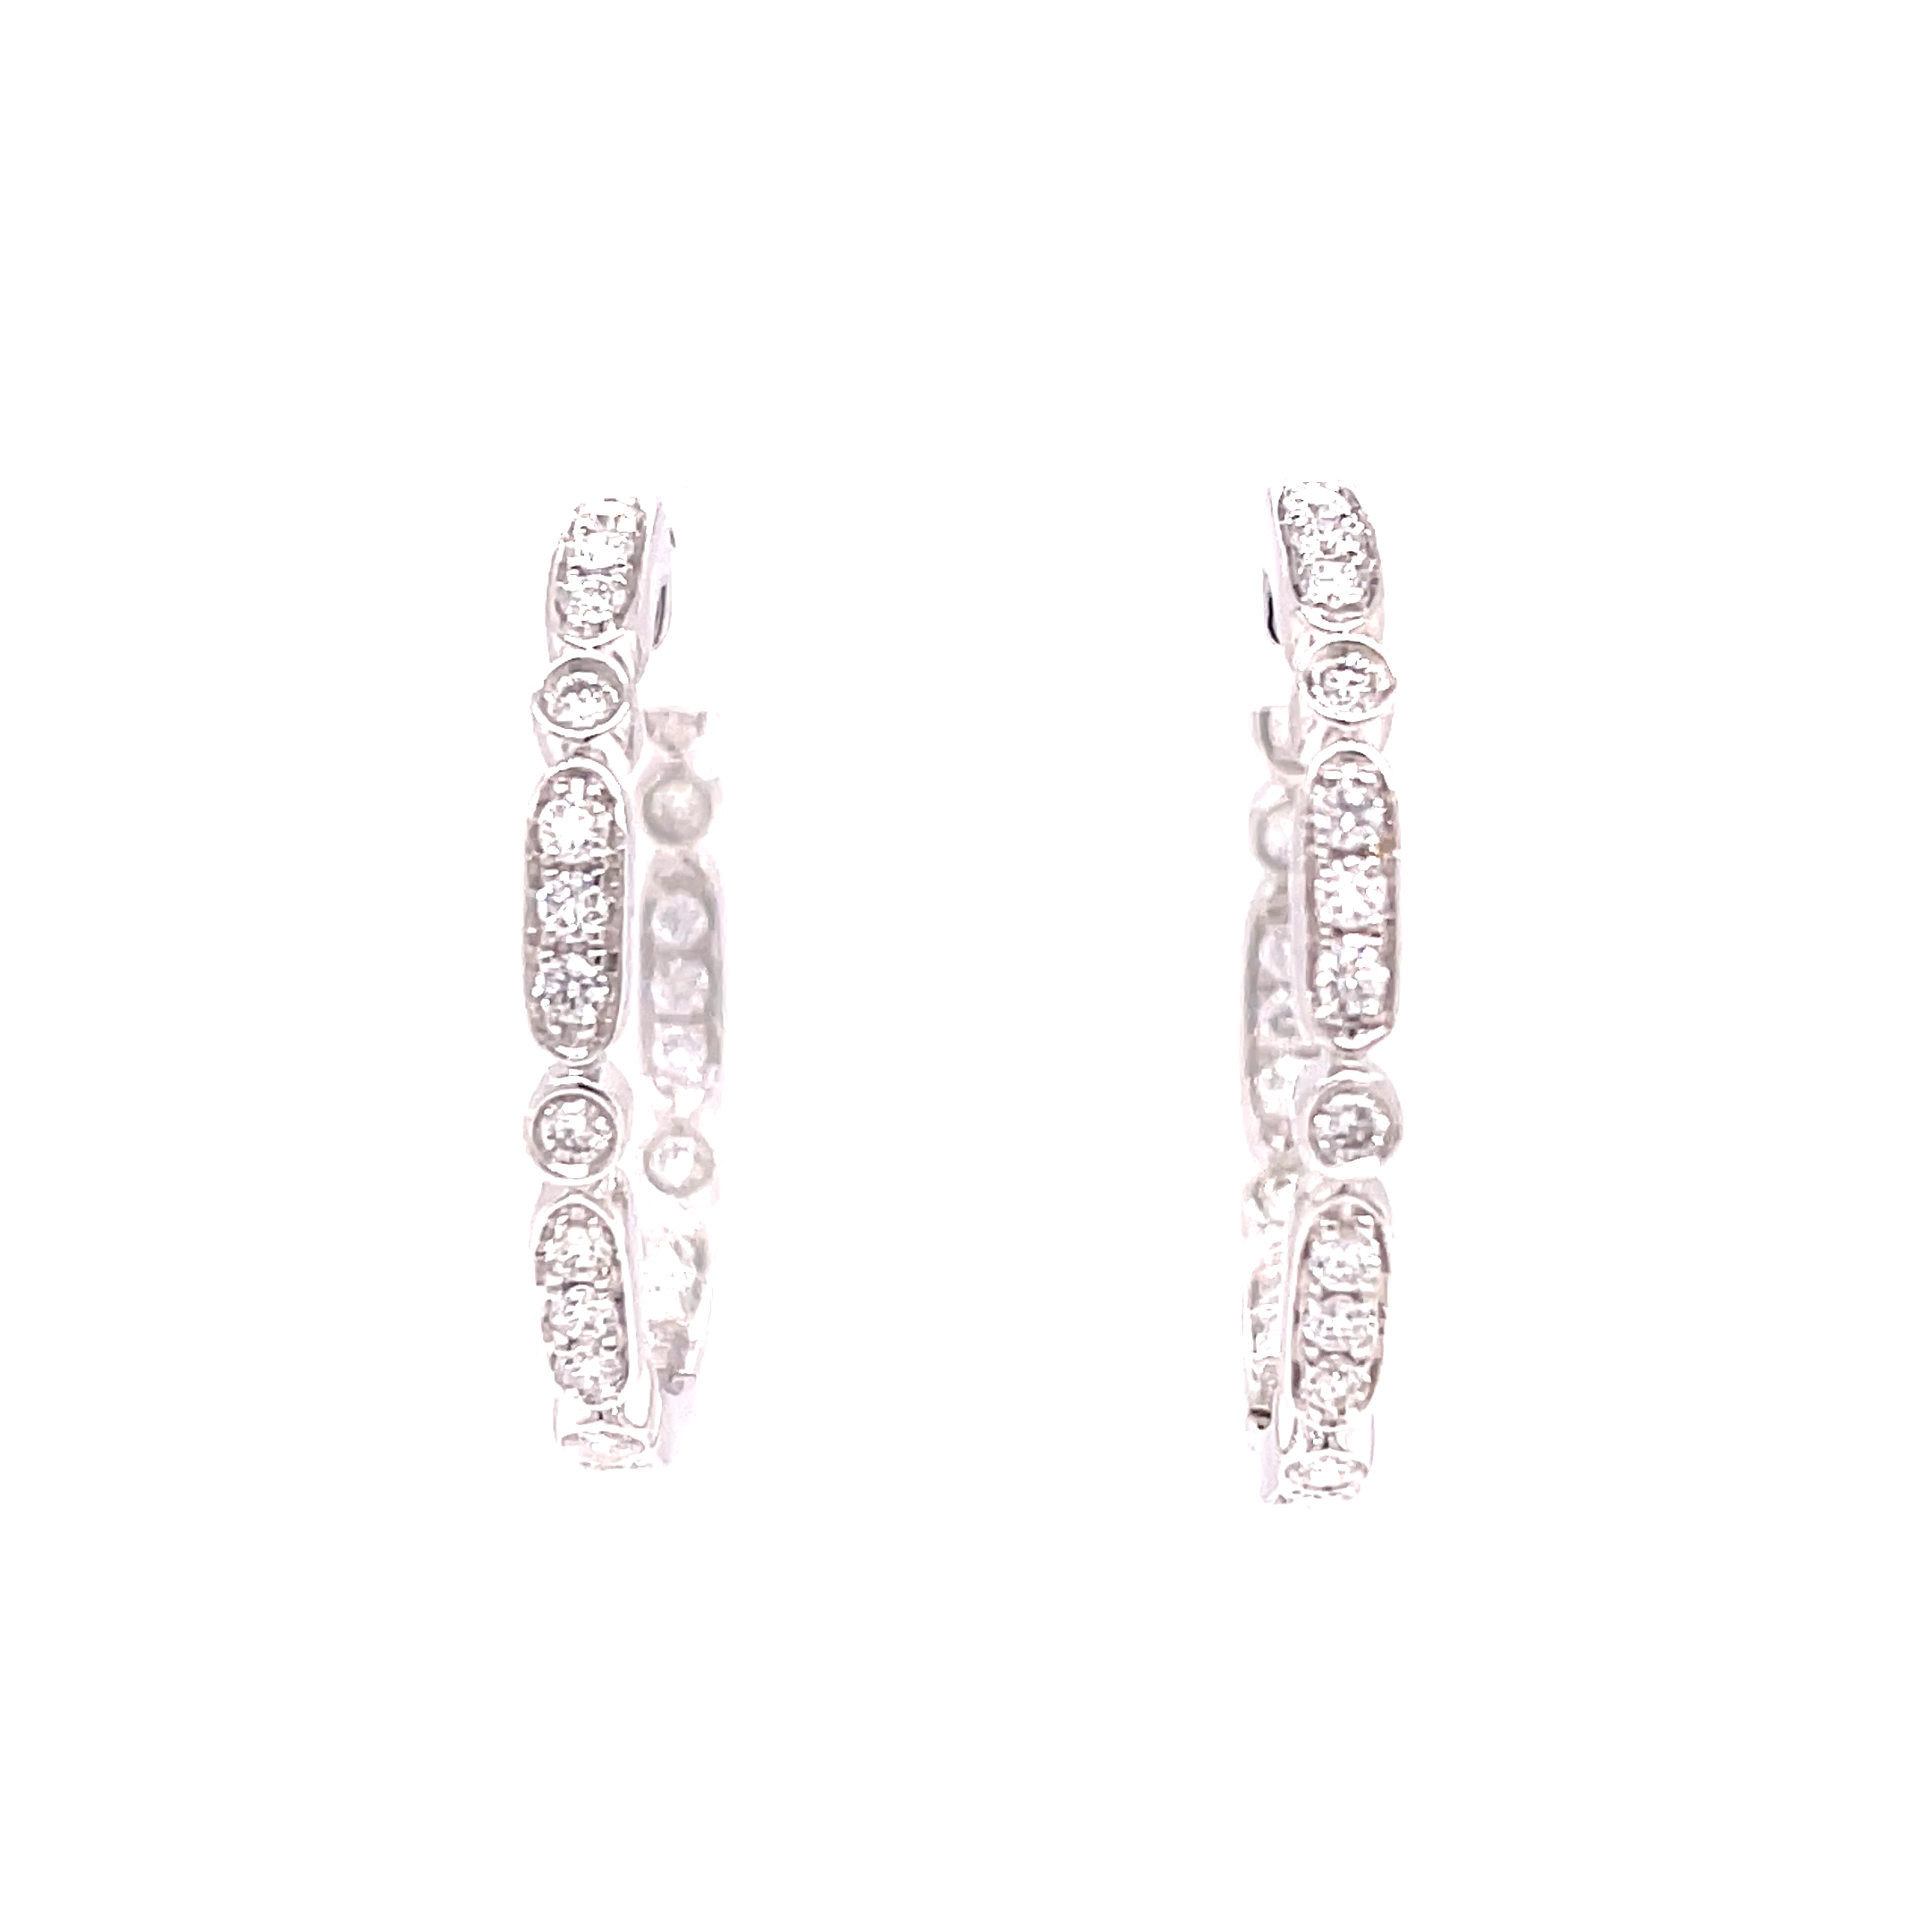 14KW Hoop Earrings With Diamonds On The Interior And Exterior Forward Sections